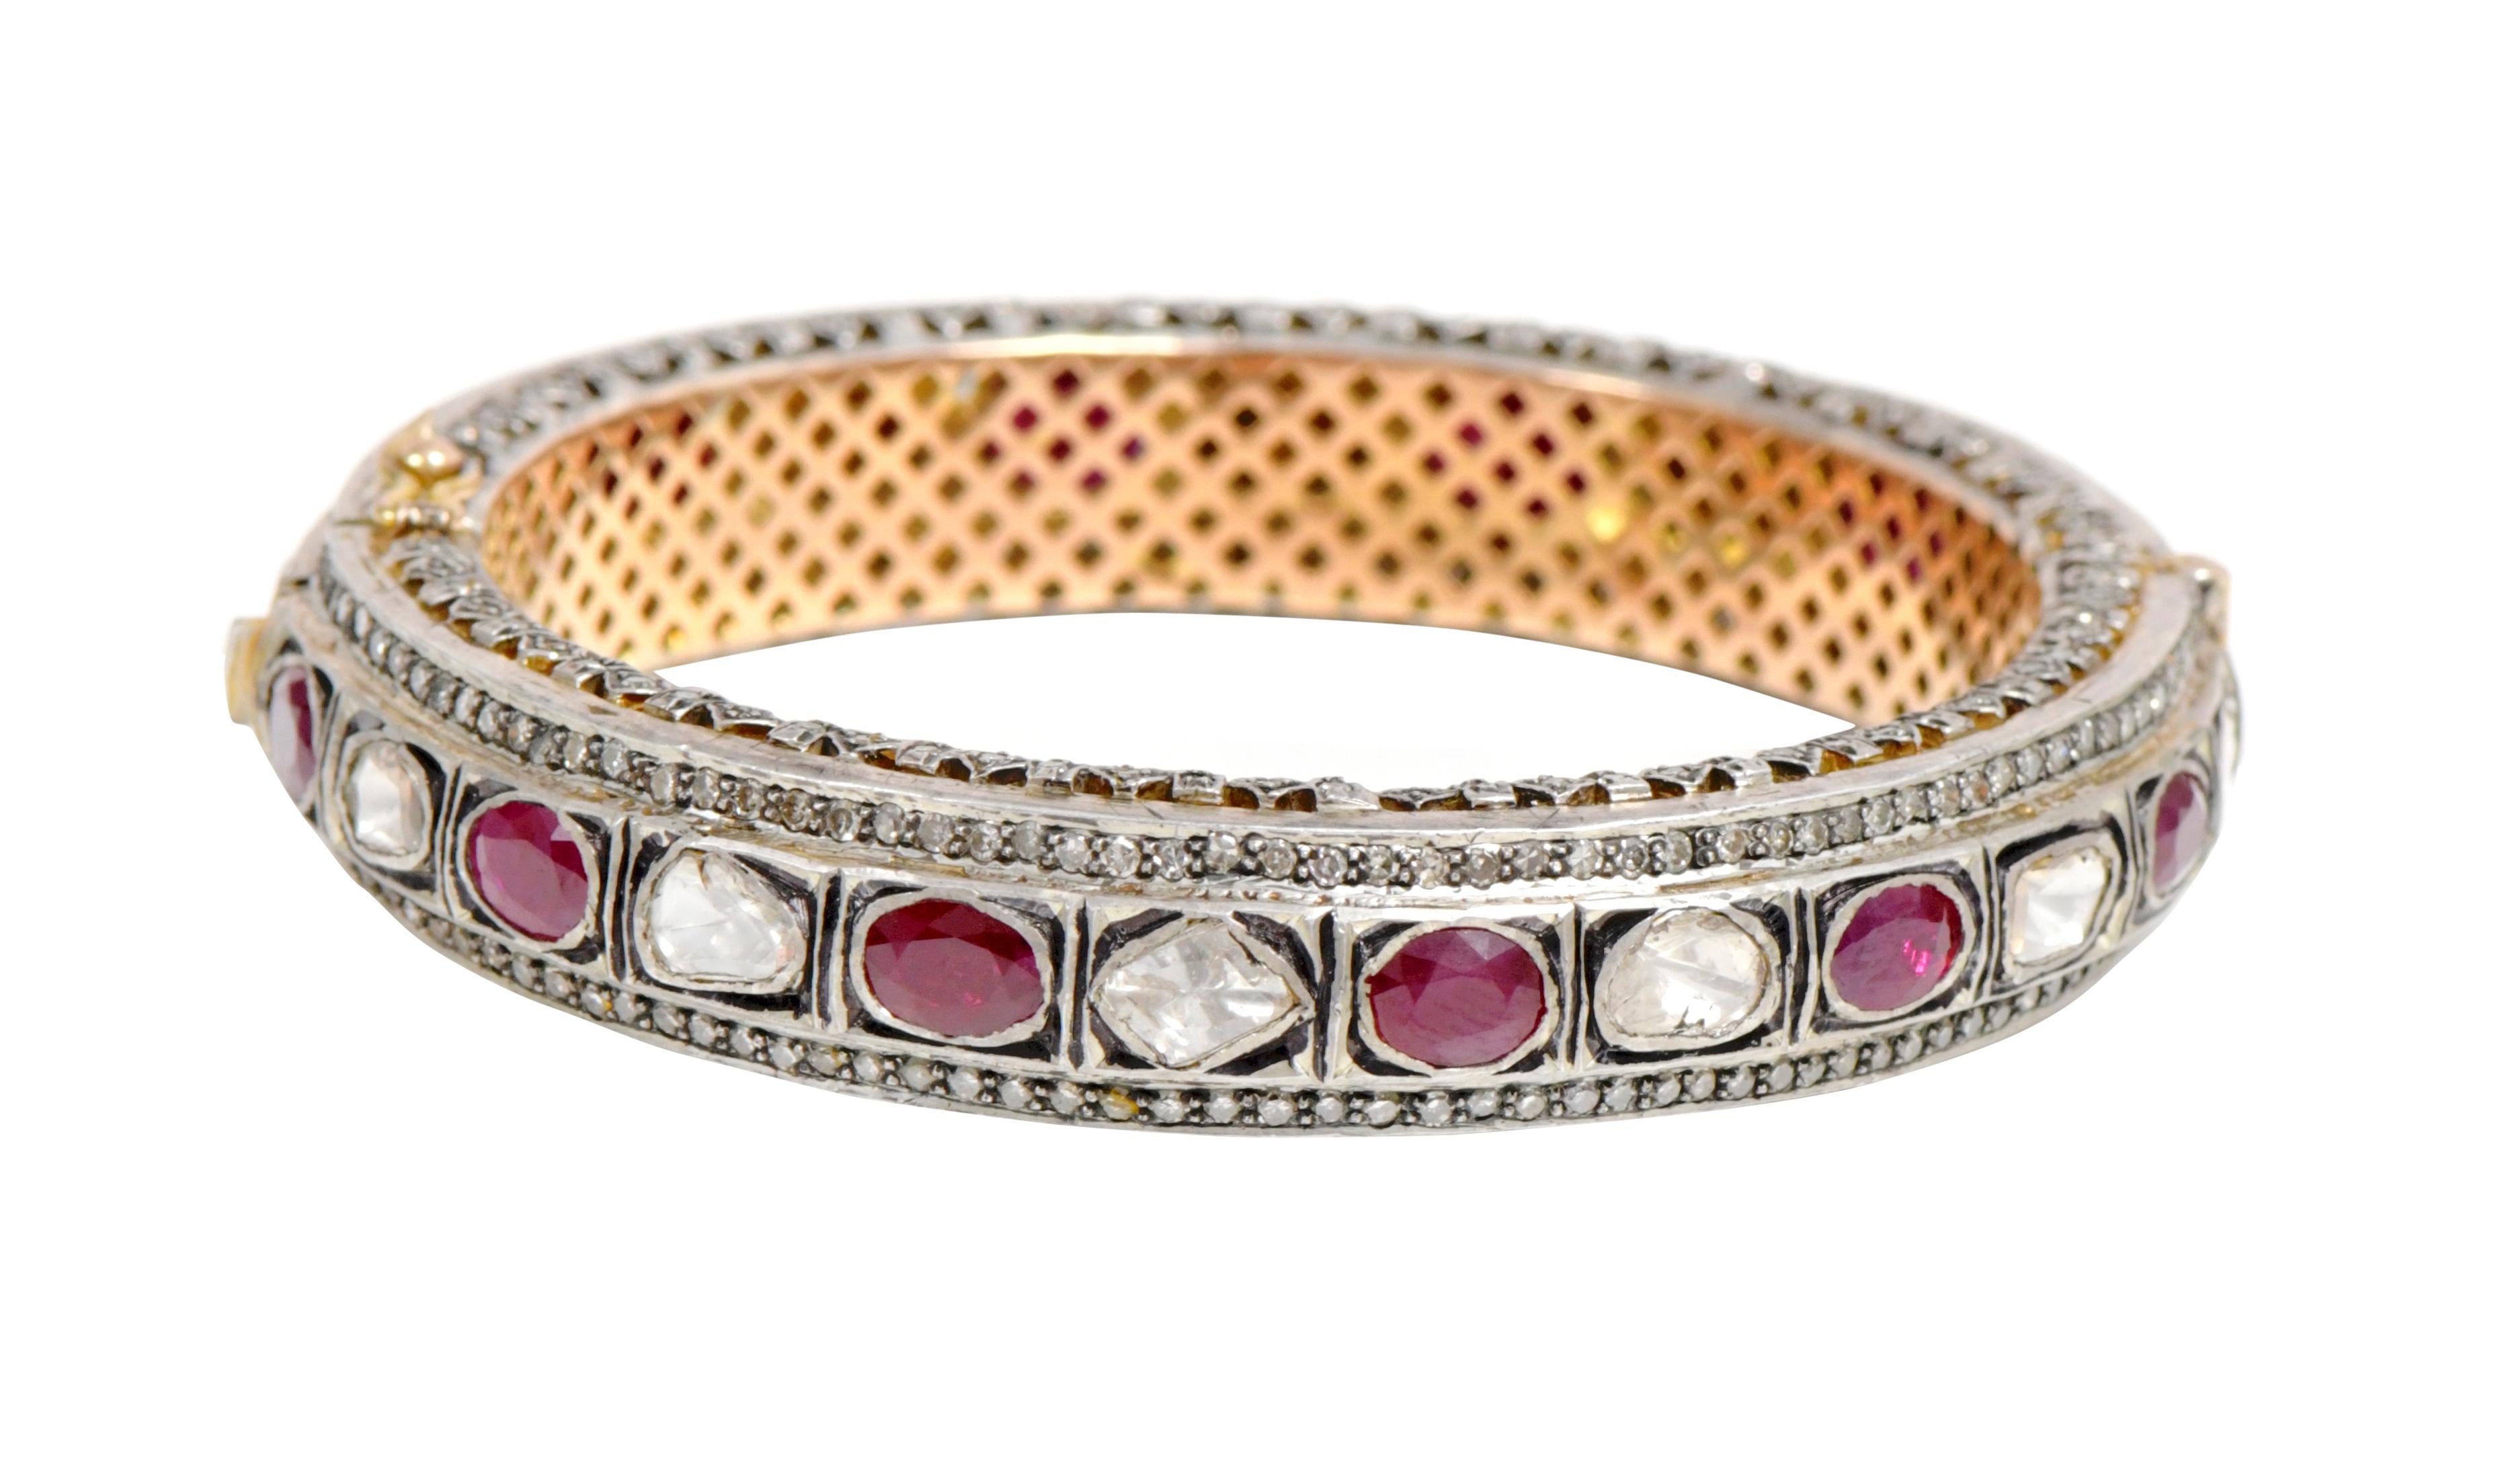 Diamond and Ruby Tennis Bangle in Art-Deco Style

This Victorian period art-deco atypical polki diamond and wine red ruby bangle is sensational. The uneven triangle and U-cut flat polki diamond solitaires alternated with oval shape solitaire rubies